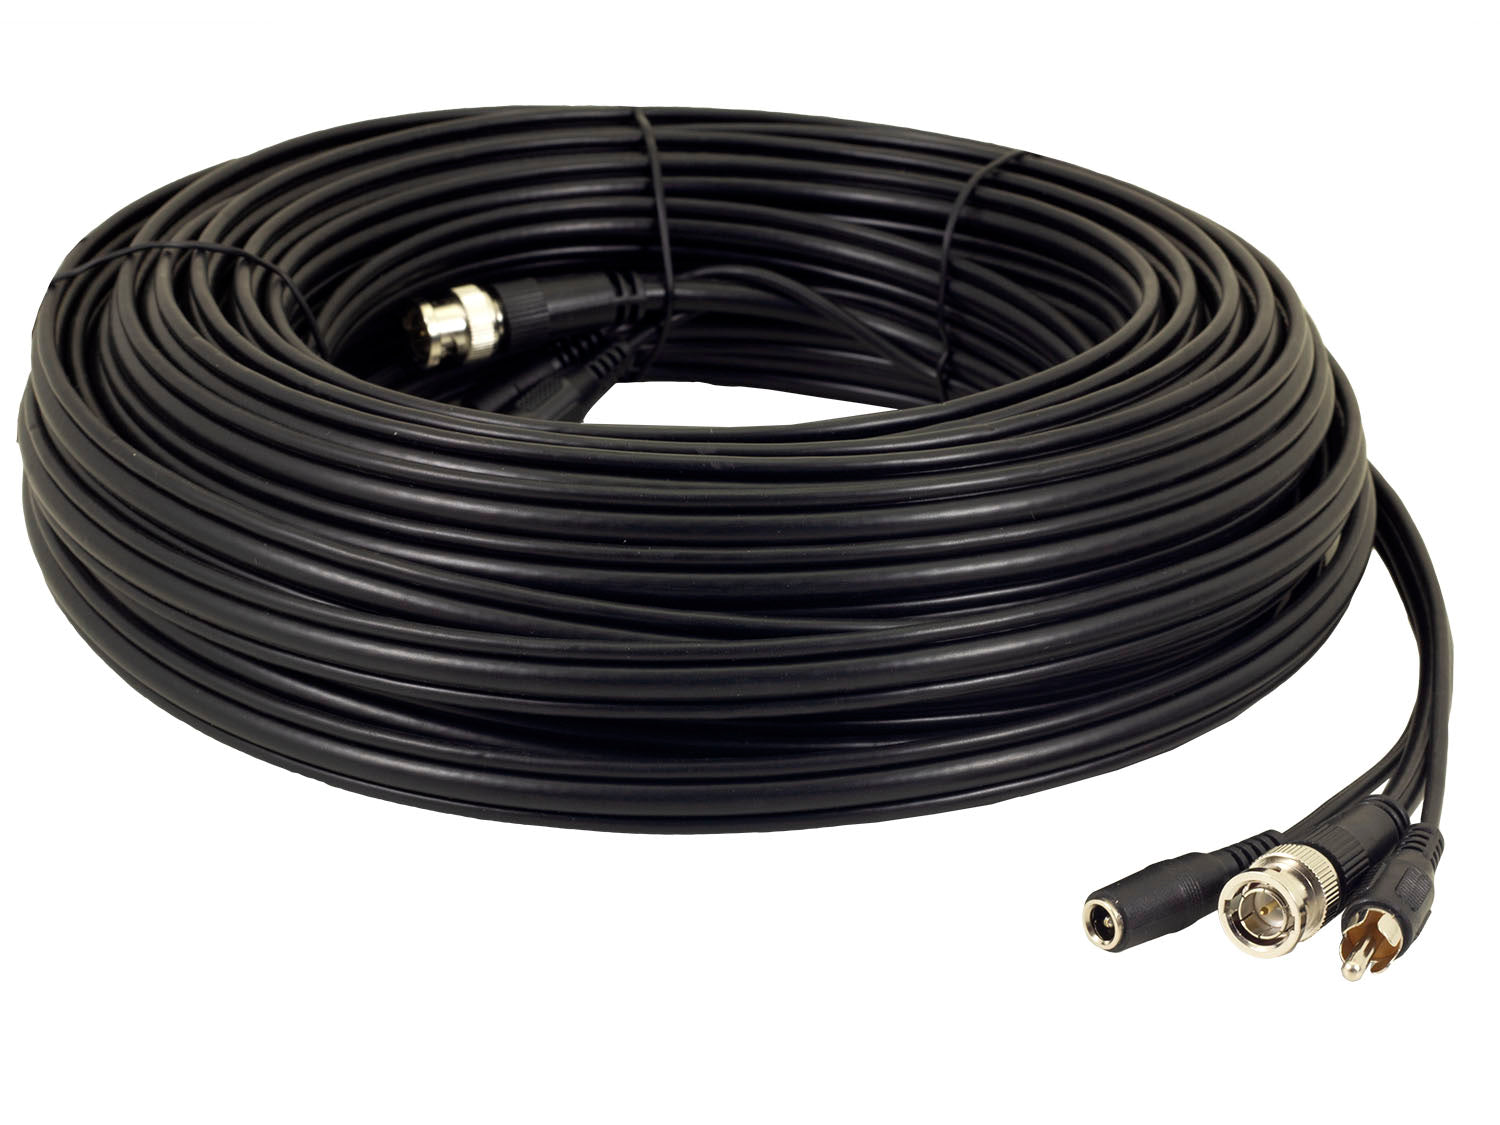 Pro RG59 Coaxial Cable BNC Video RCA Audio DC Power